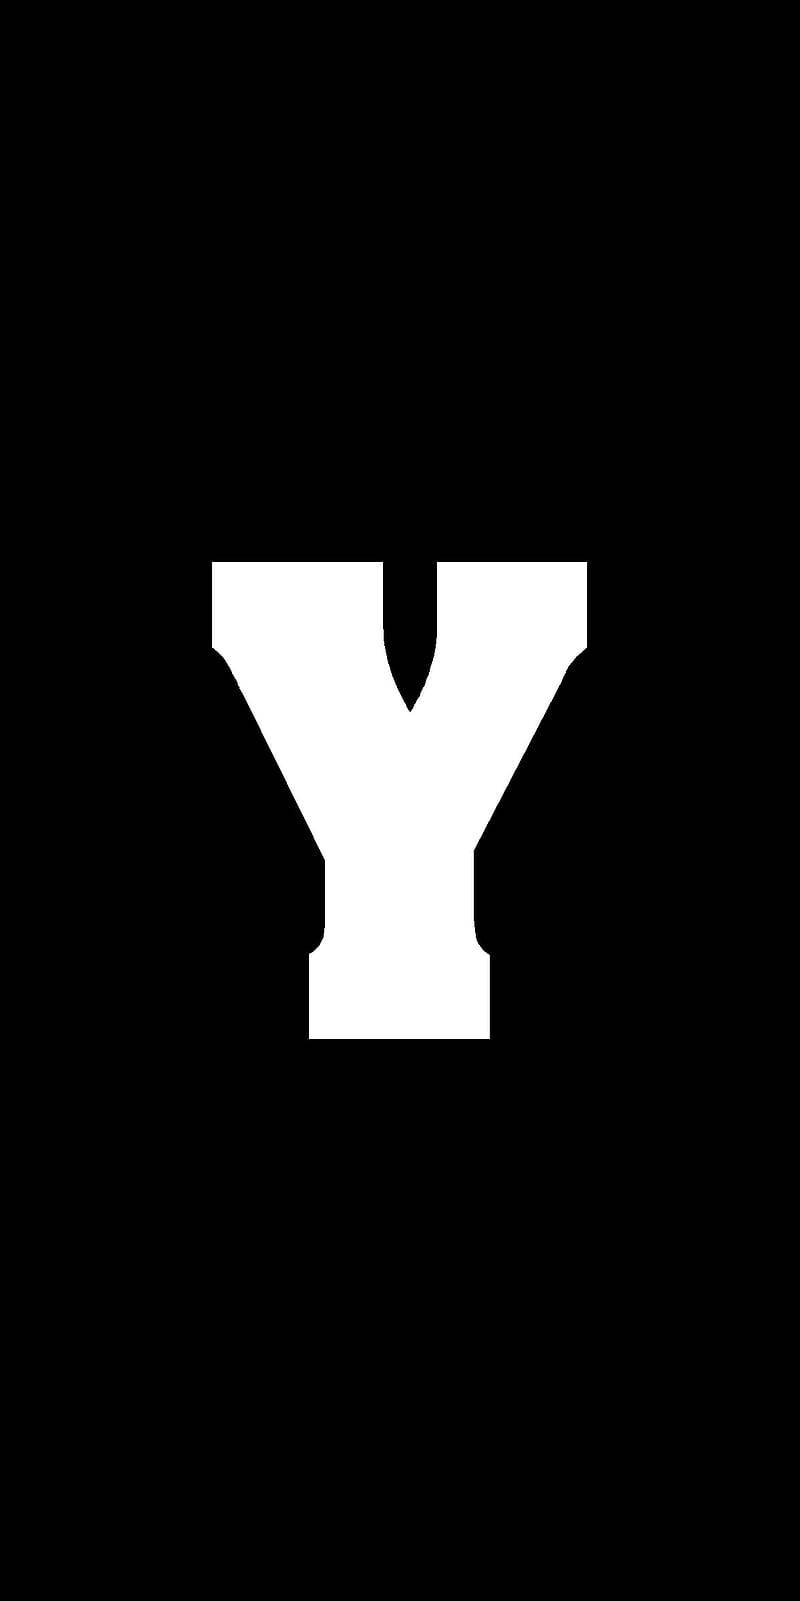 Captivating Letter Y In White On Black Background Background